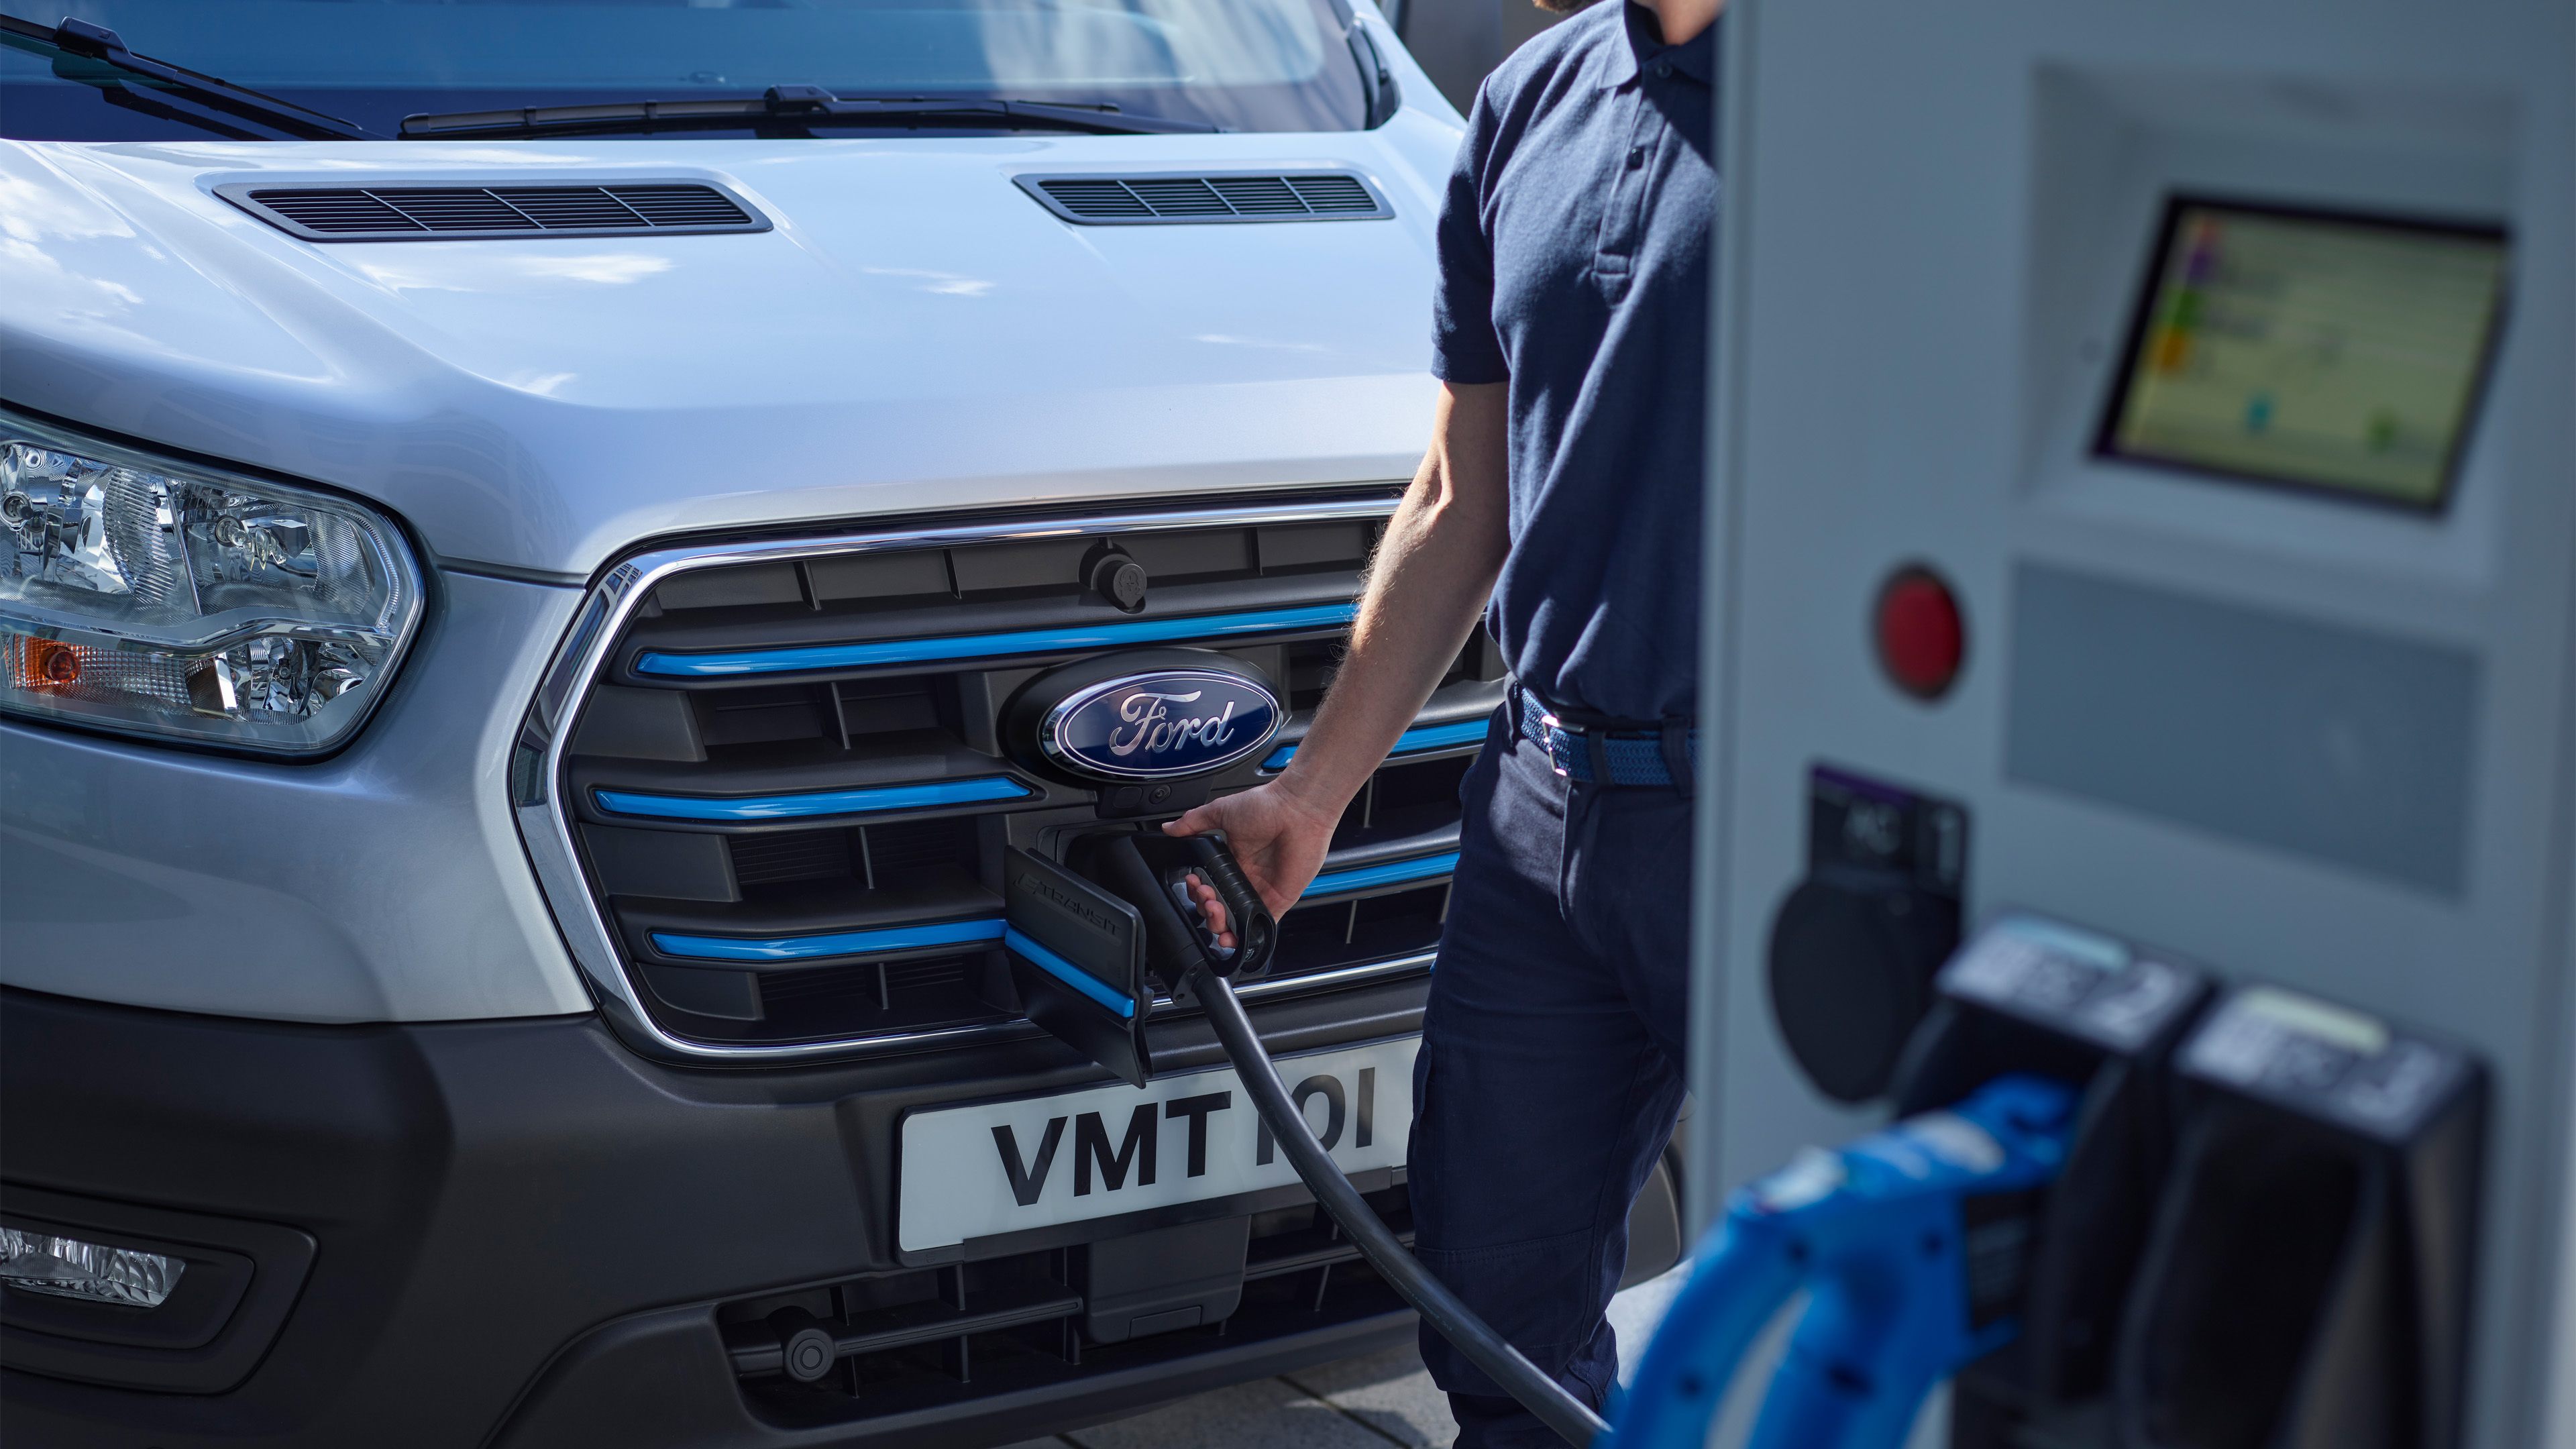 Ford has confirmed that its E-Transit commercial vehicle will provide businesses with a new benchmark for electric vehicle productivity, value and ownership experience when it comes to market next year, as the production vehicle makes its European public debut at the CV Show 2021 in Birmingham, UK.